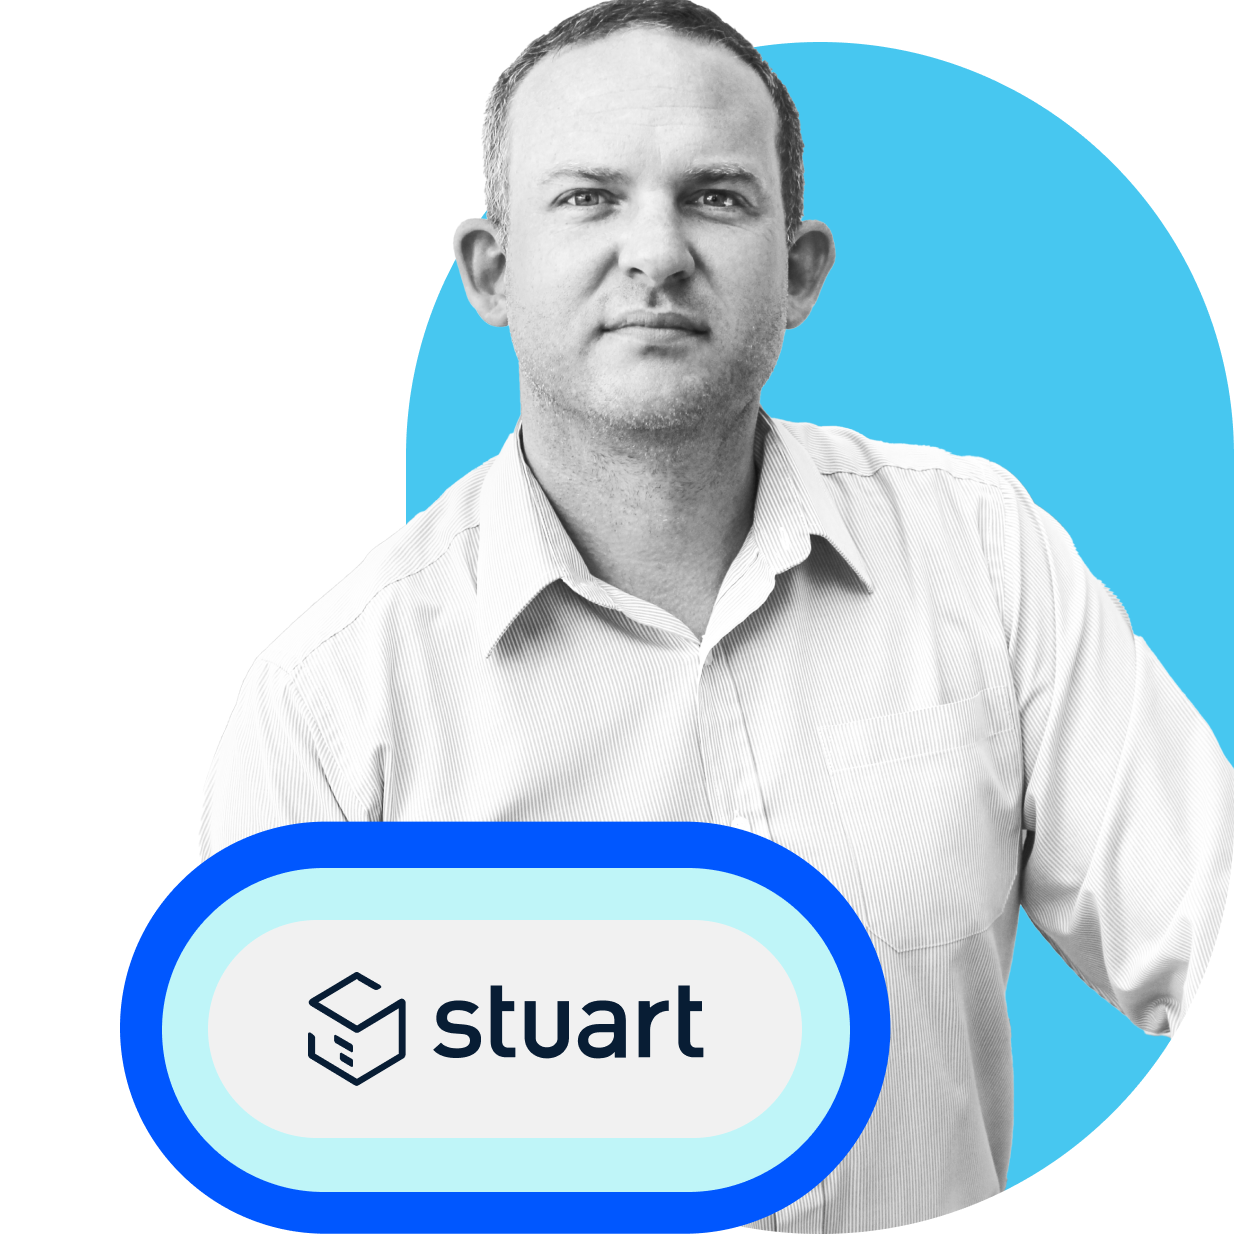 Stuart is using Intercom to engage and proactively support their clients – at just the right time